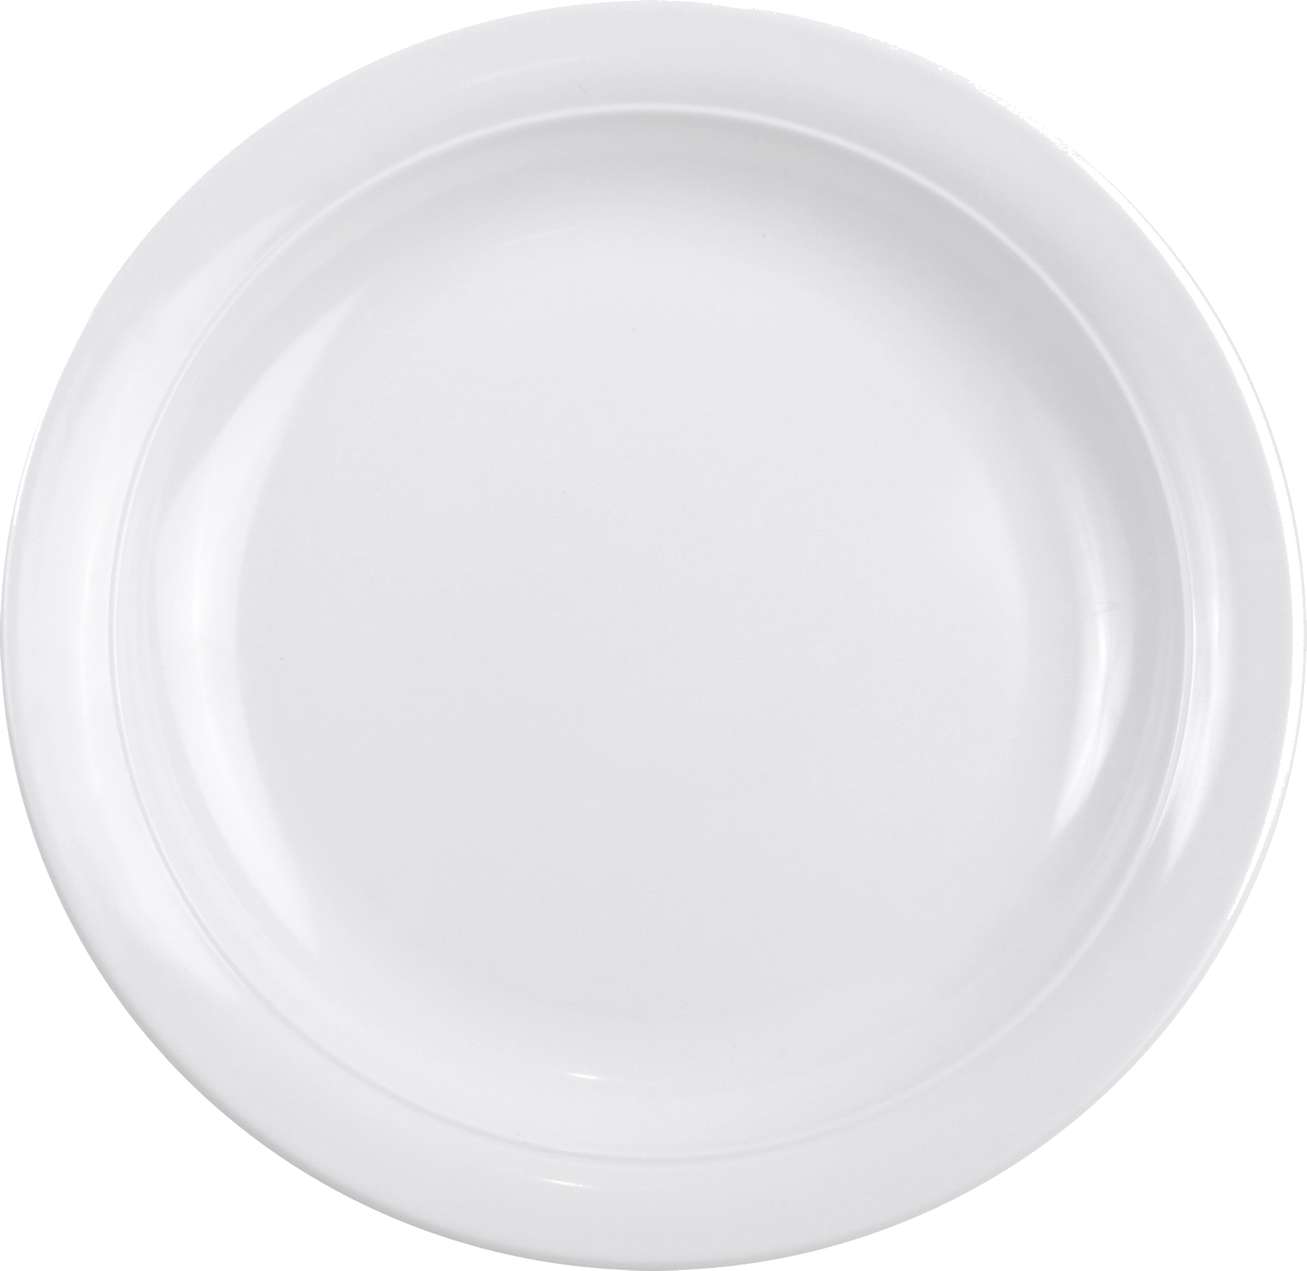 plate clipart two